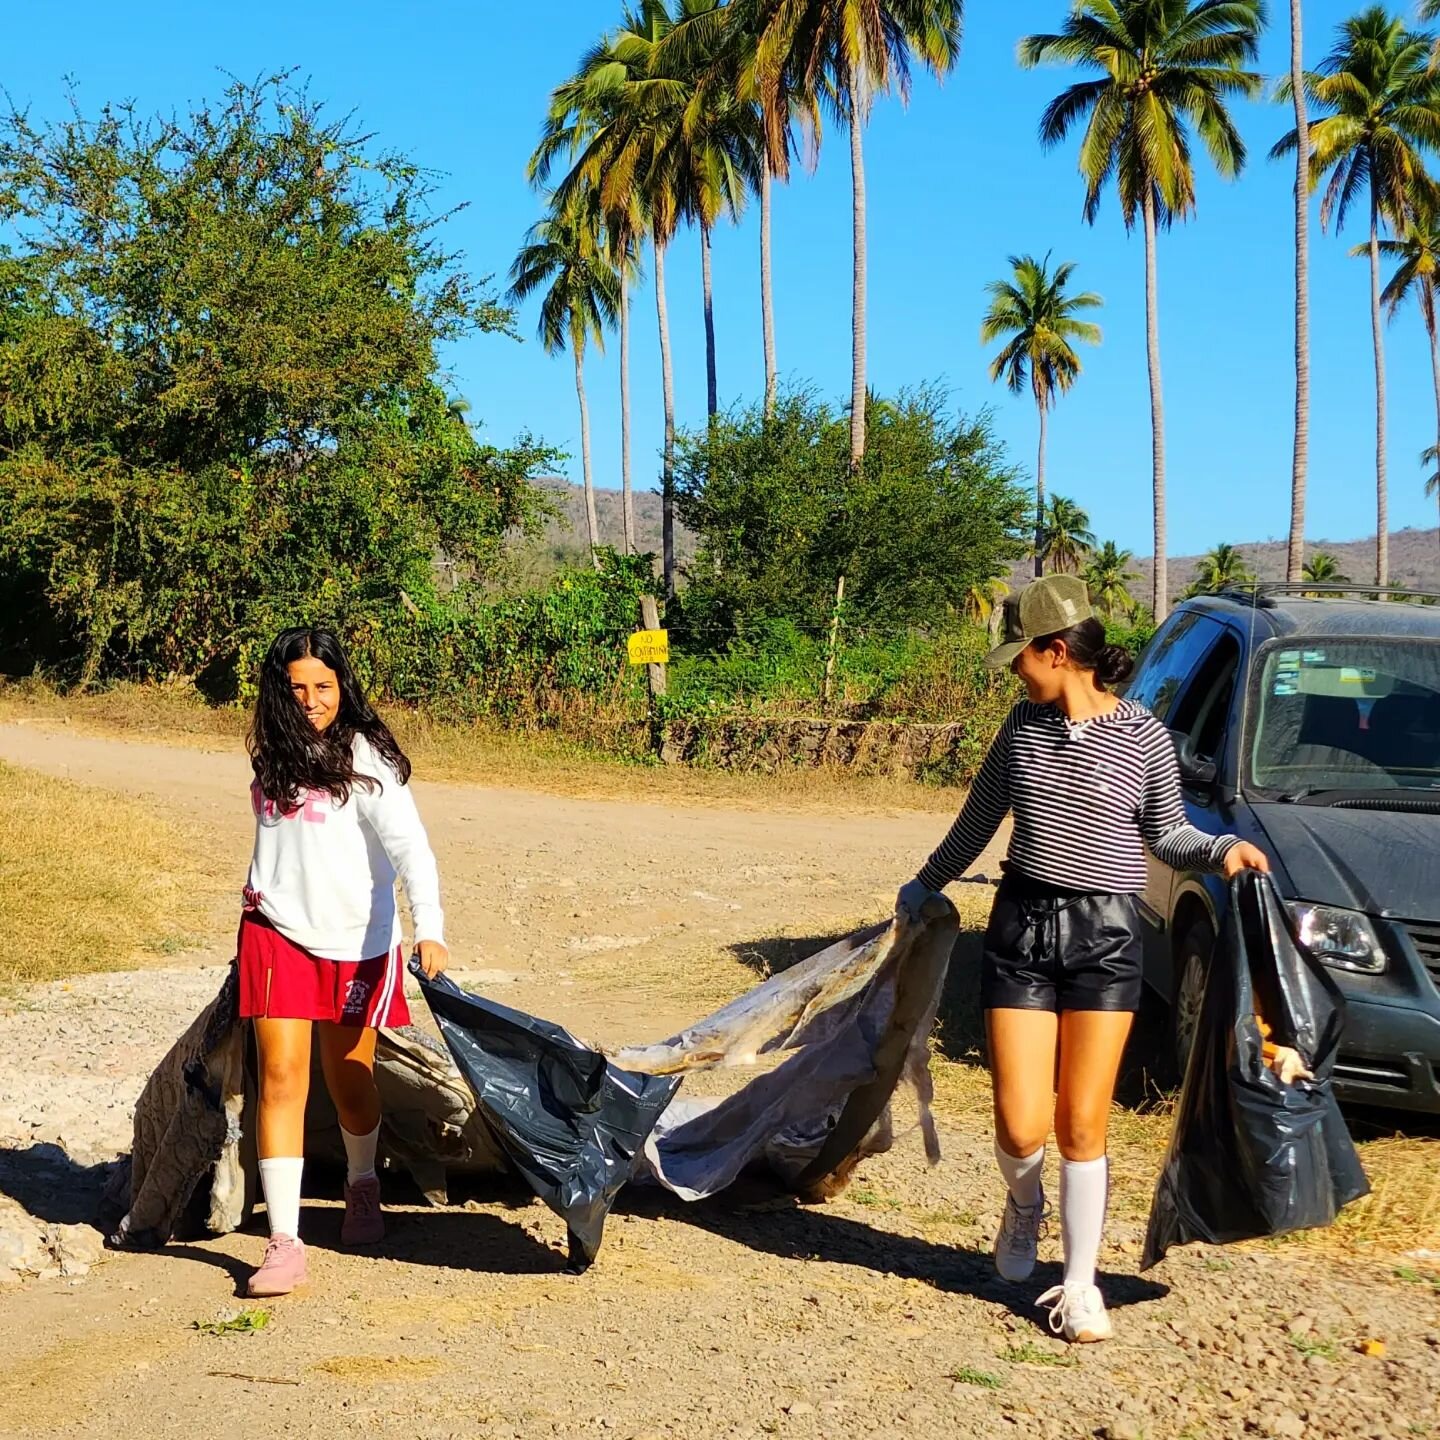 It's world water day!🧊🌏🌊 Today Cati, our environmental program coordinator, took some of the kids to clean up the river in their town 😁 To a cleaner and brighter future 😊🥳
-

#worldwaterday #diadelagua #trashcleanup #aguacalientenueva #environm